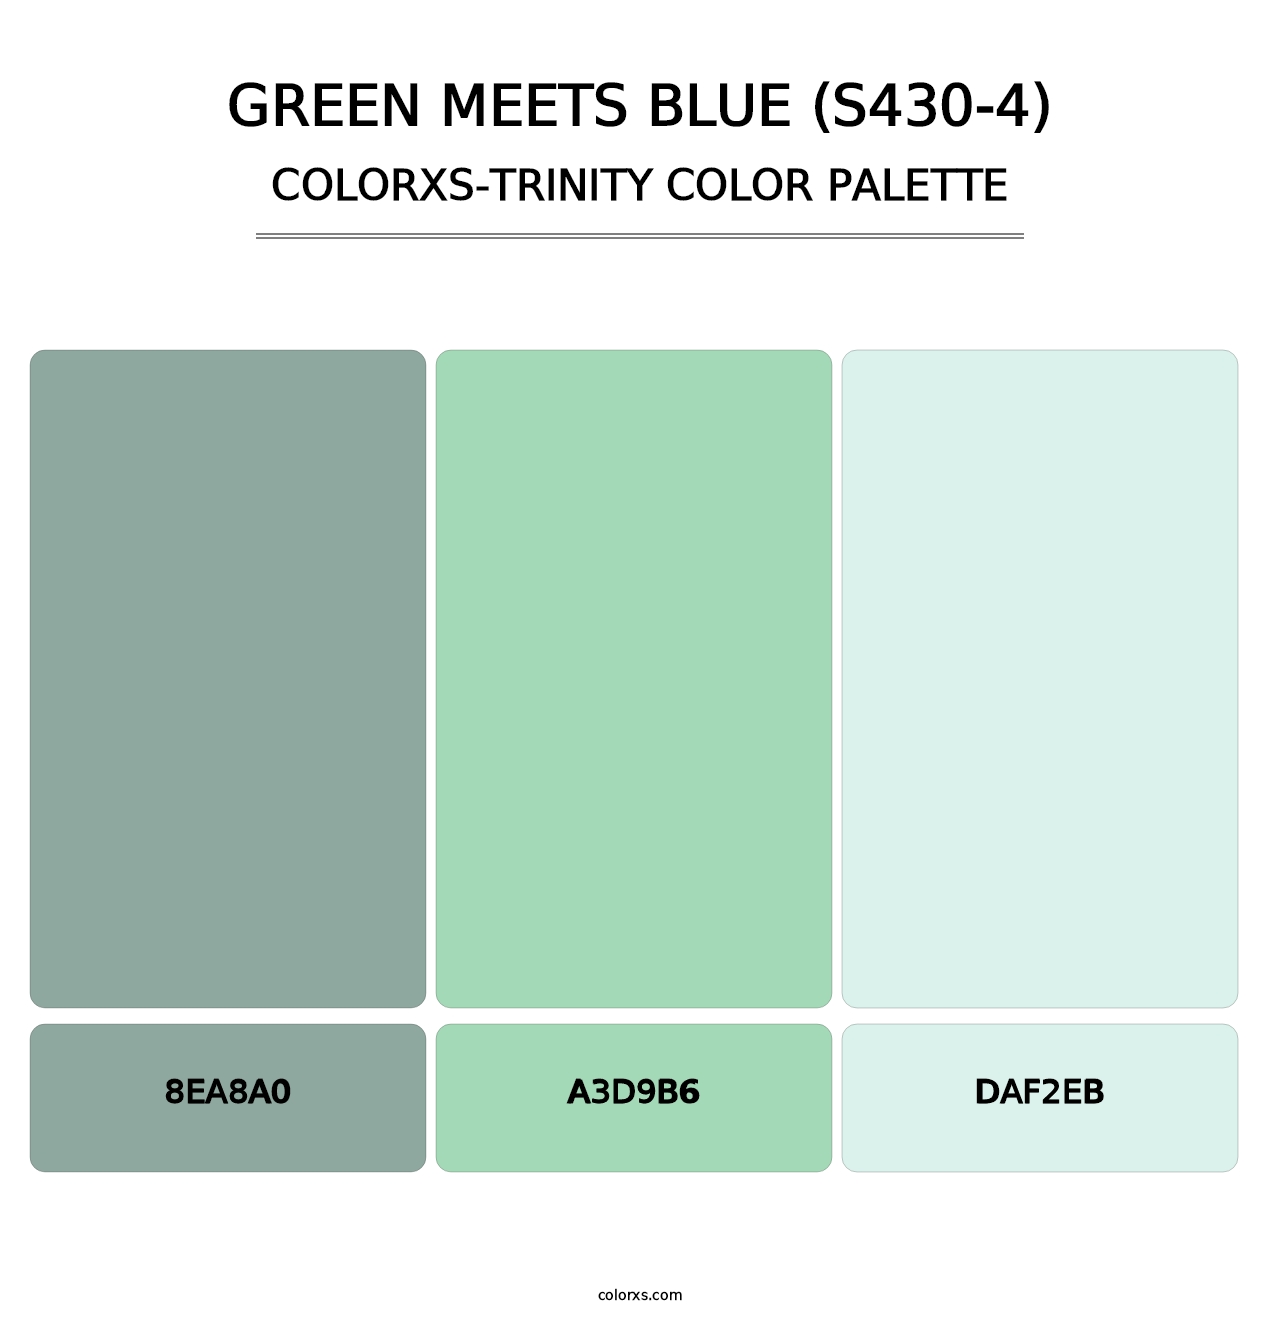 Green Meets Blue (S430-4) - Colorxs Trinity Palette